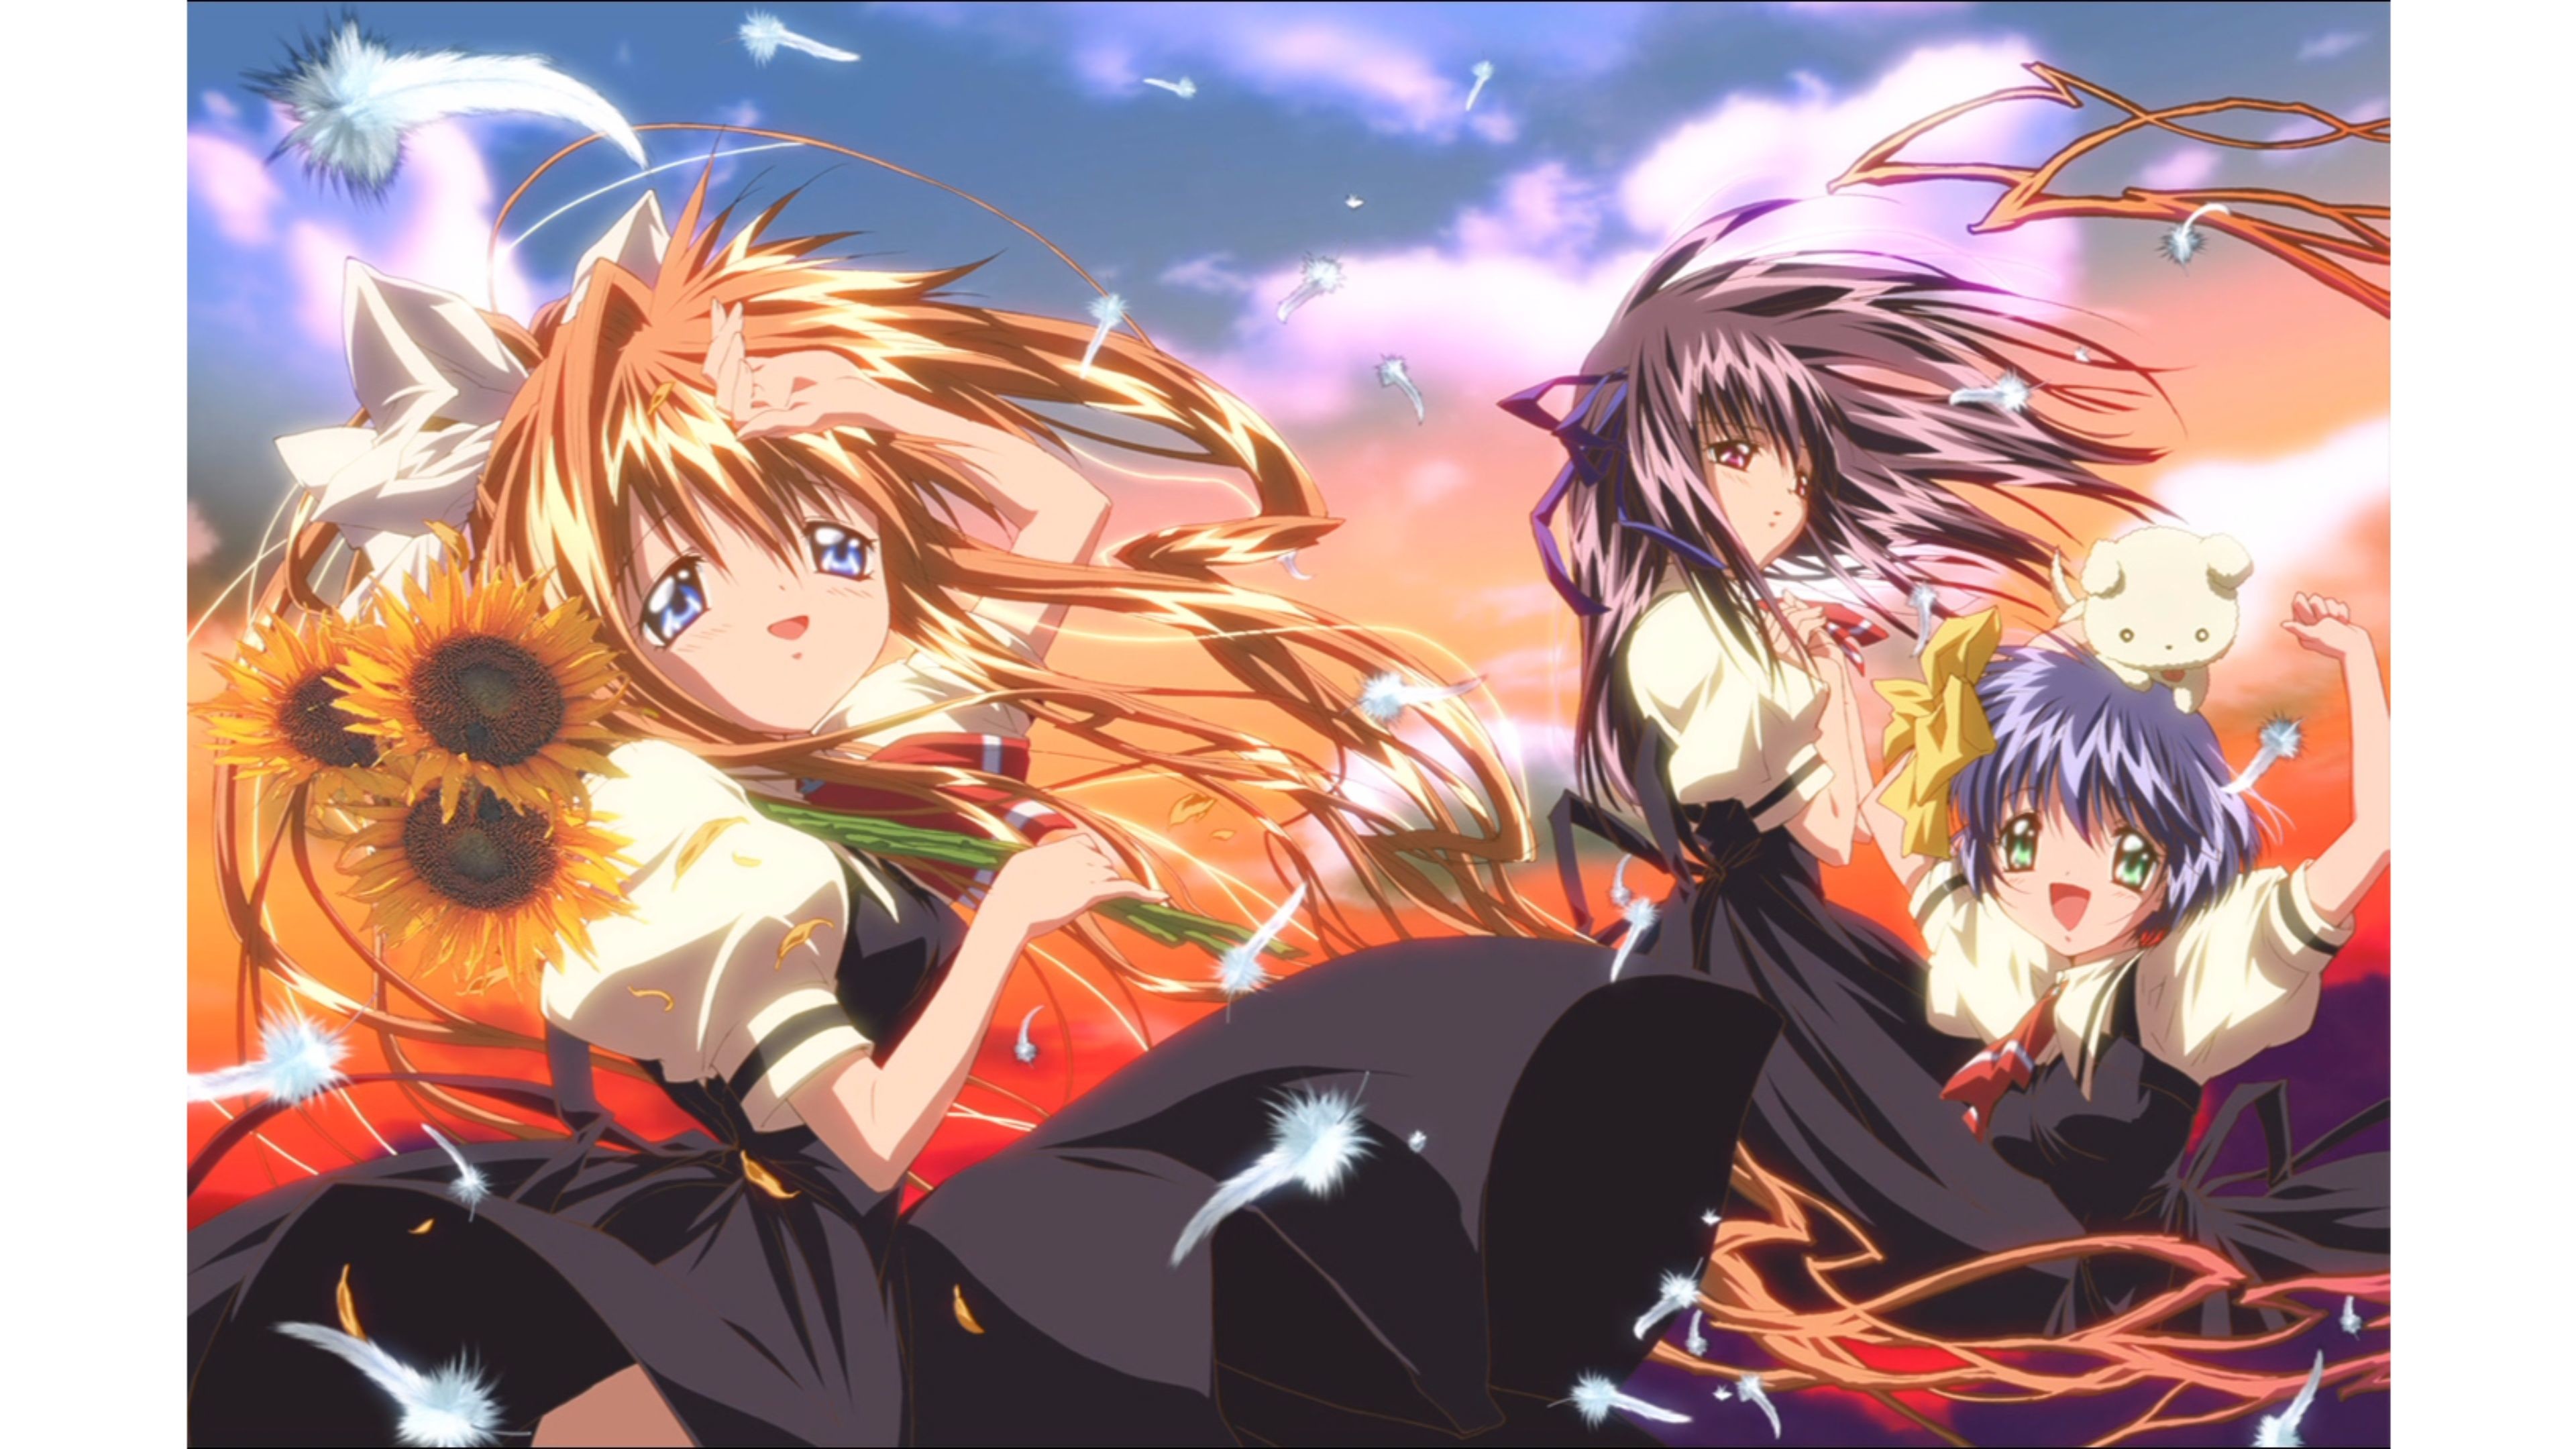 Anime Wallpaper 1366x768 67+ images